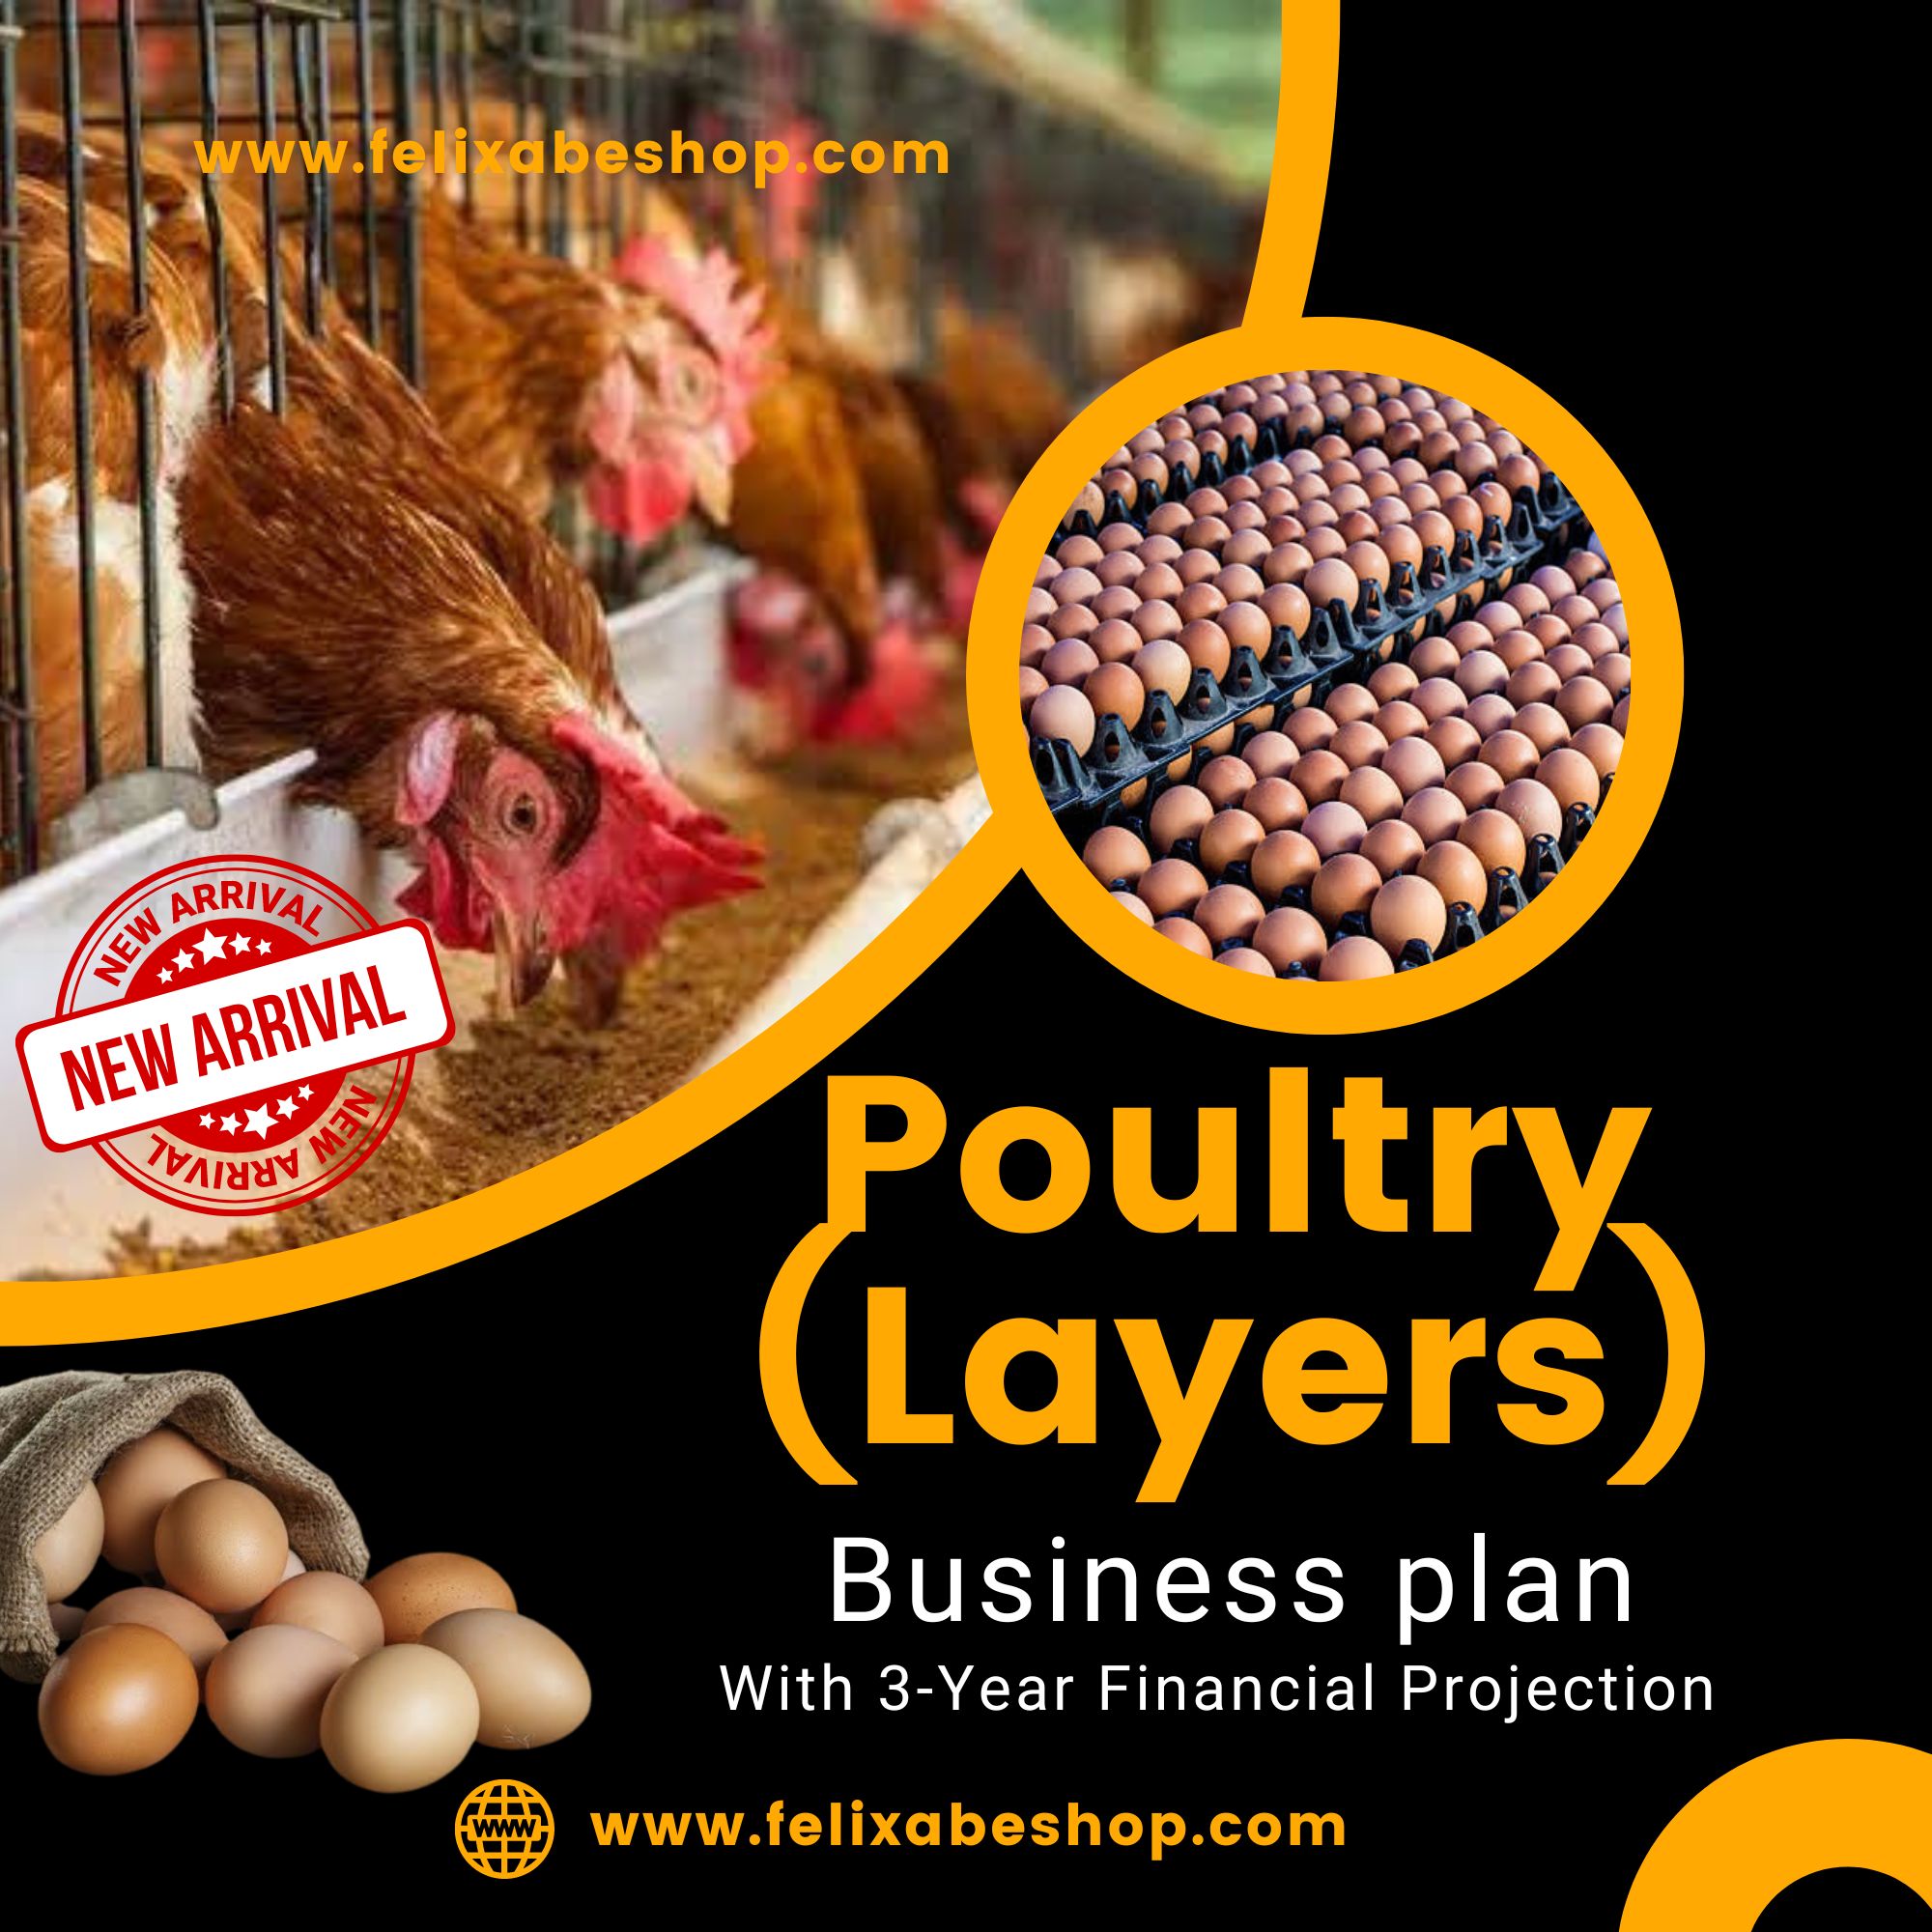 Poultry (layers) business plan